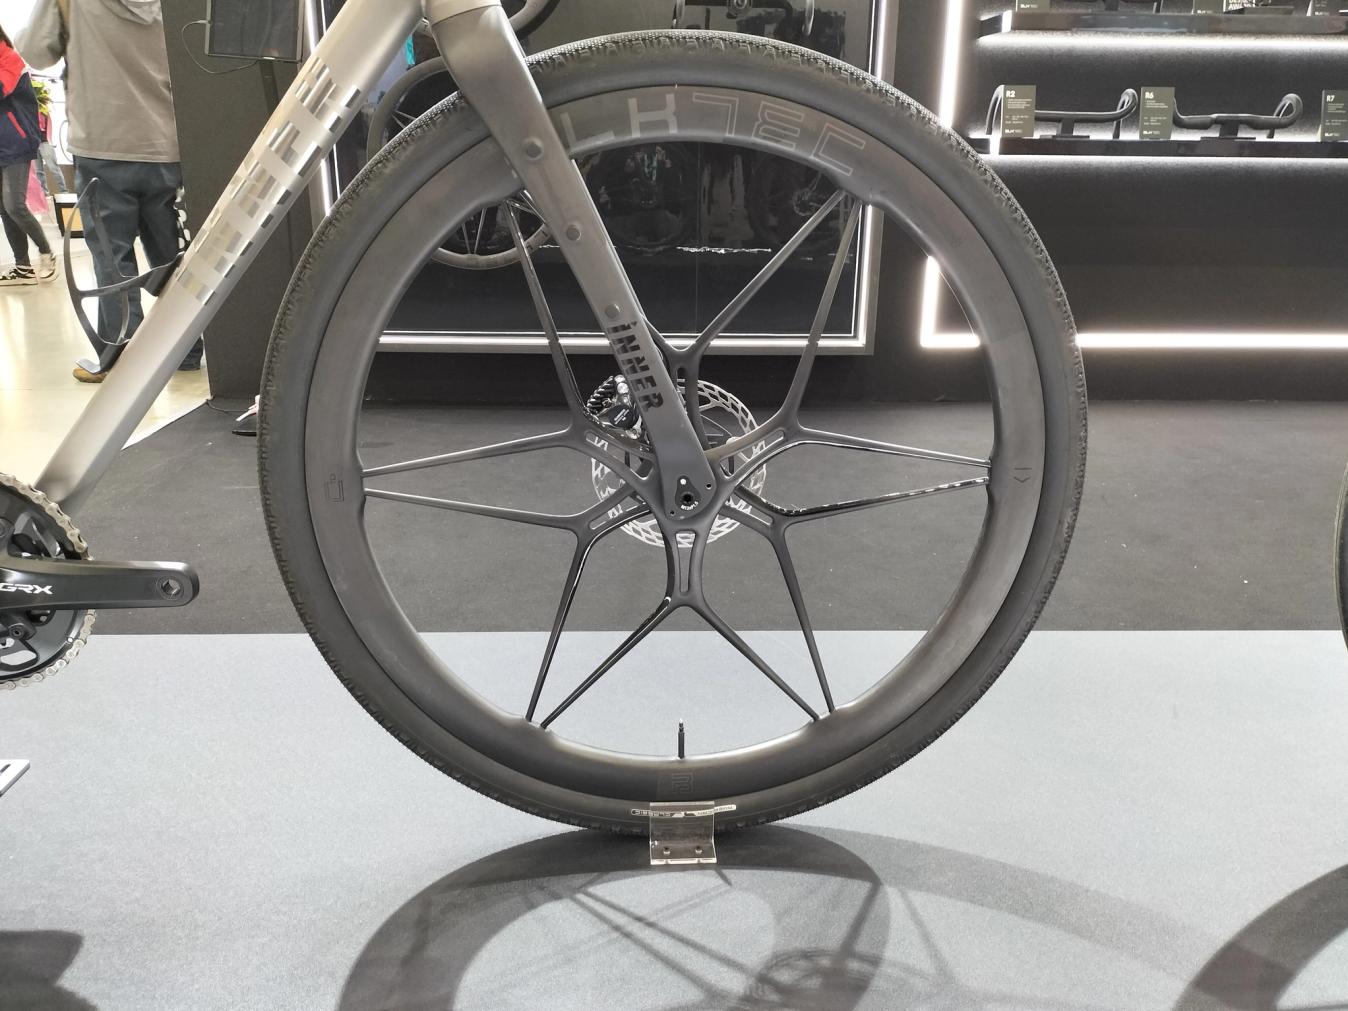 BLKTEC's C1D wheels have won a Taipei Cycling Show award